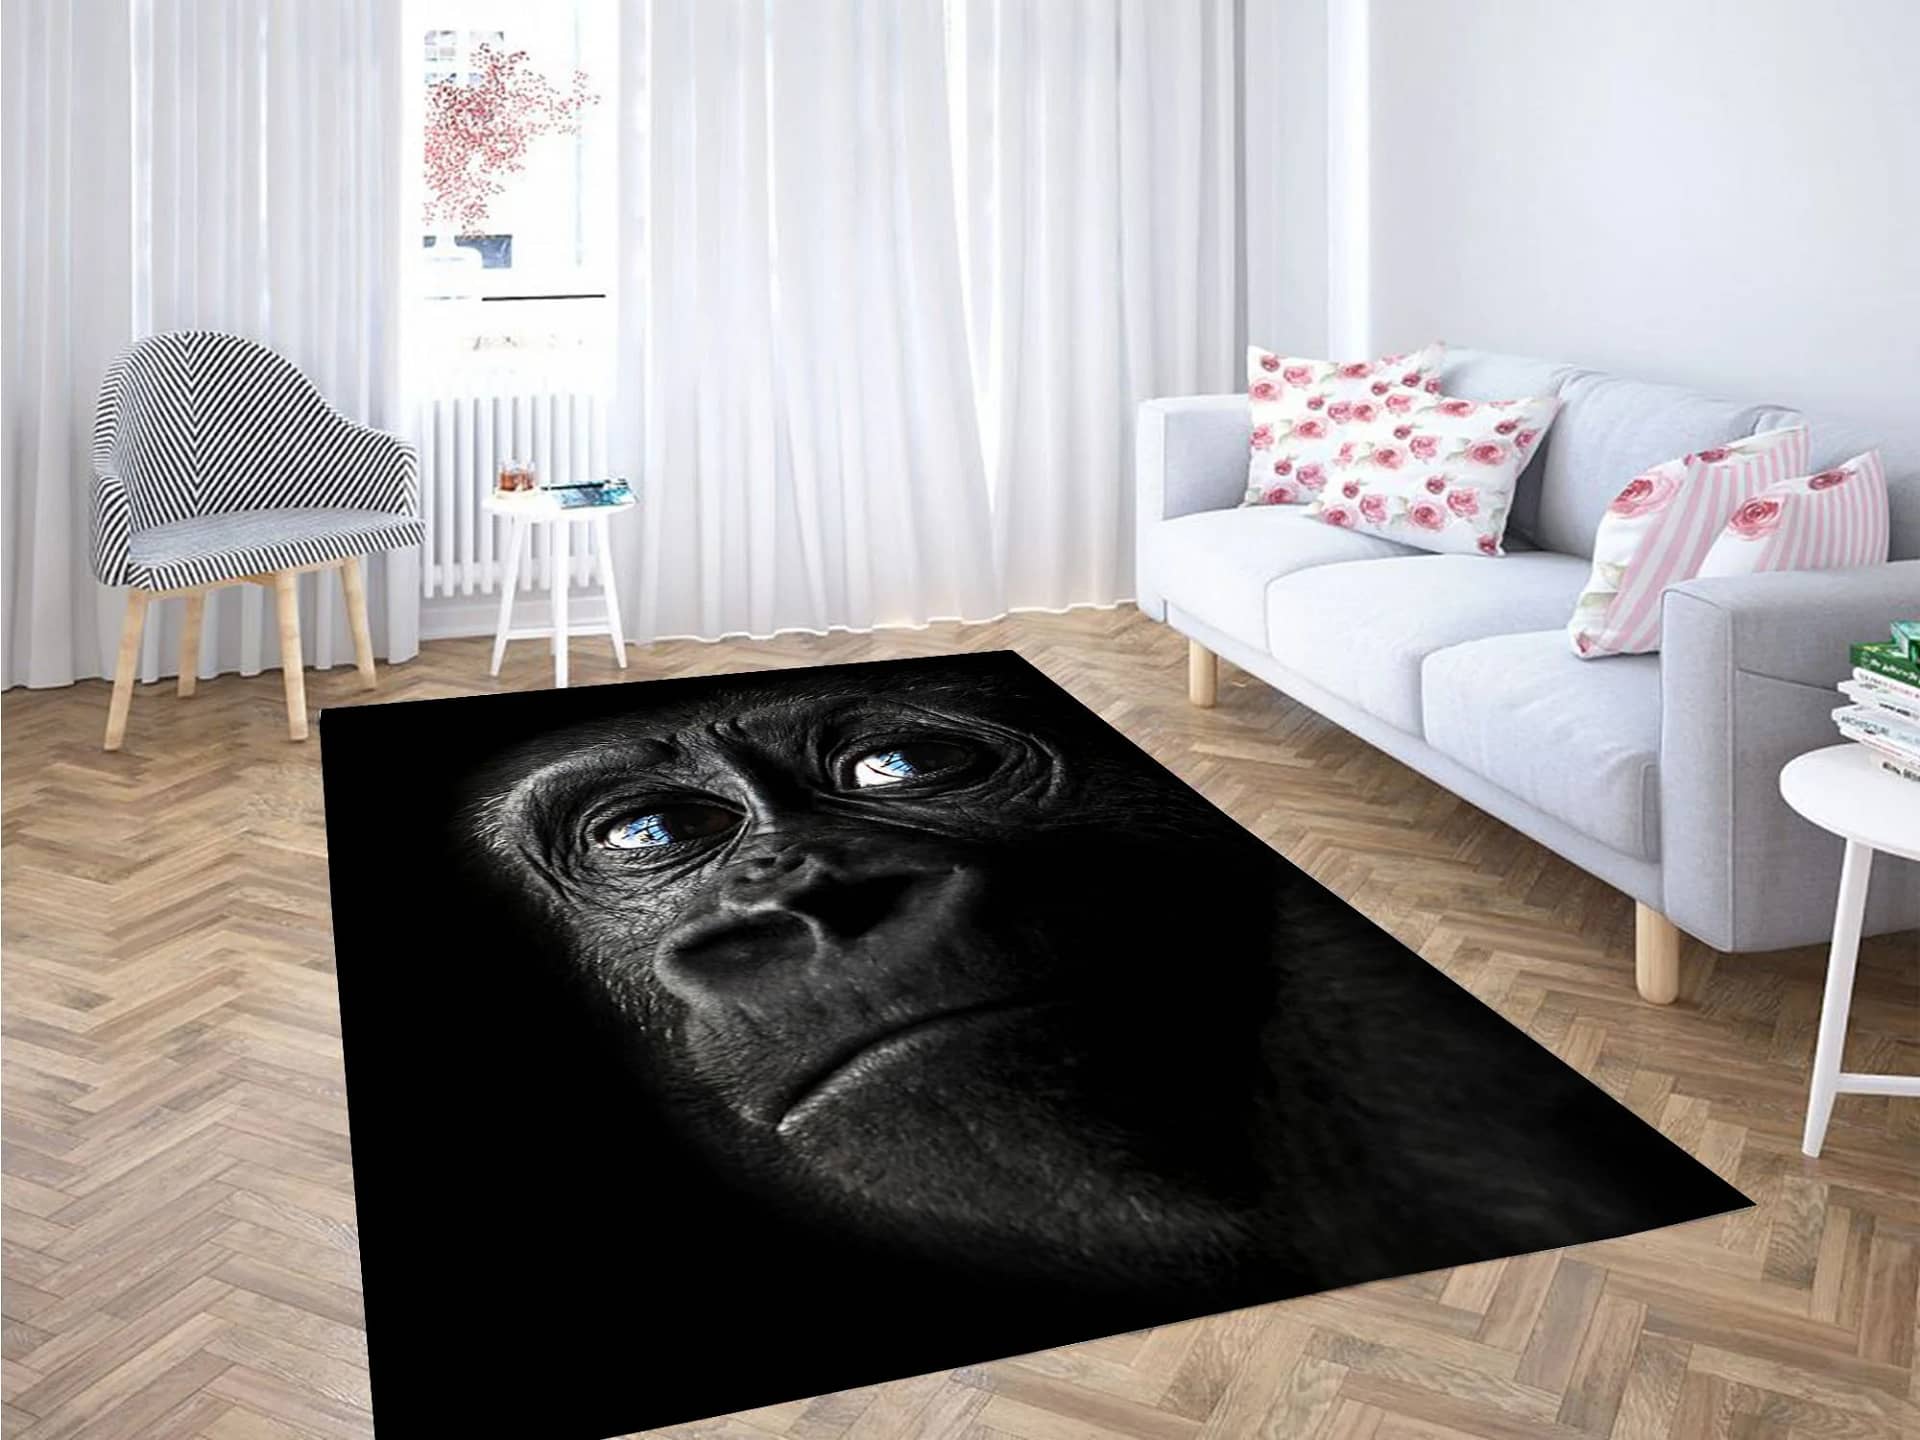 Monkey Almost Crying Carpet Rug